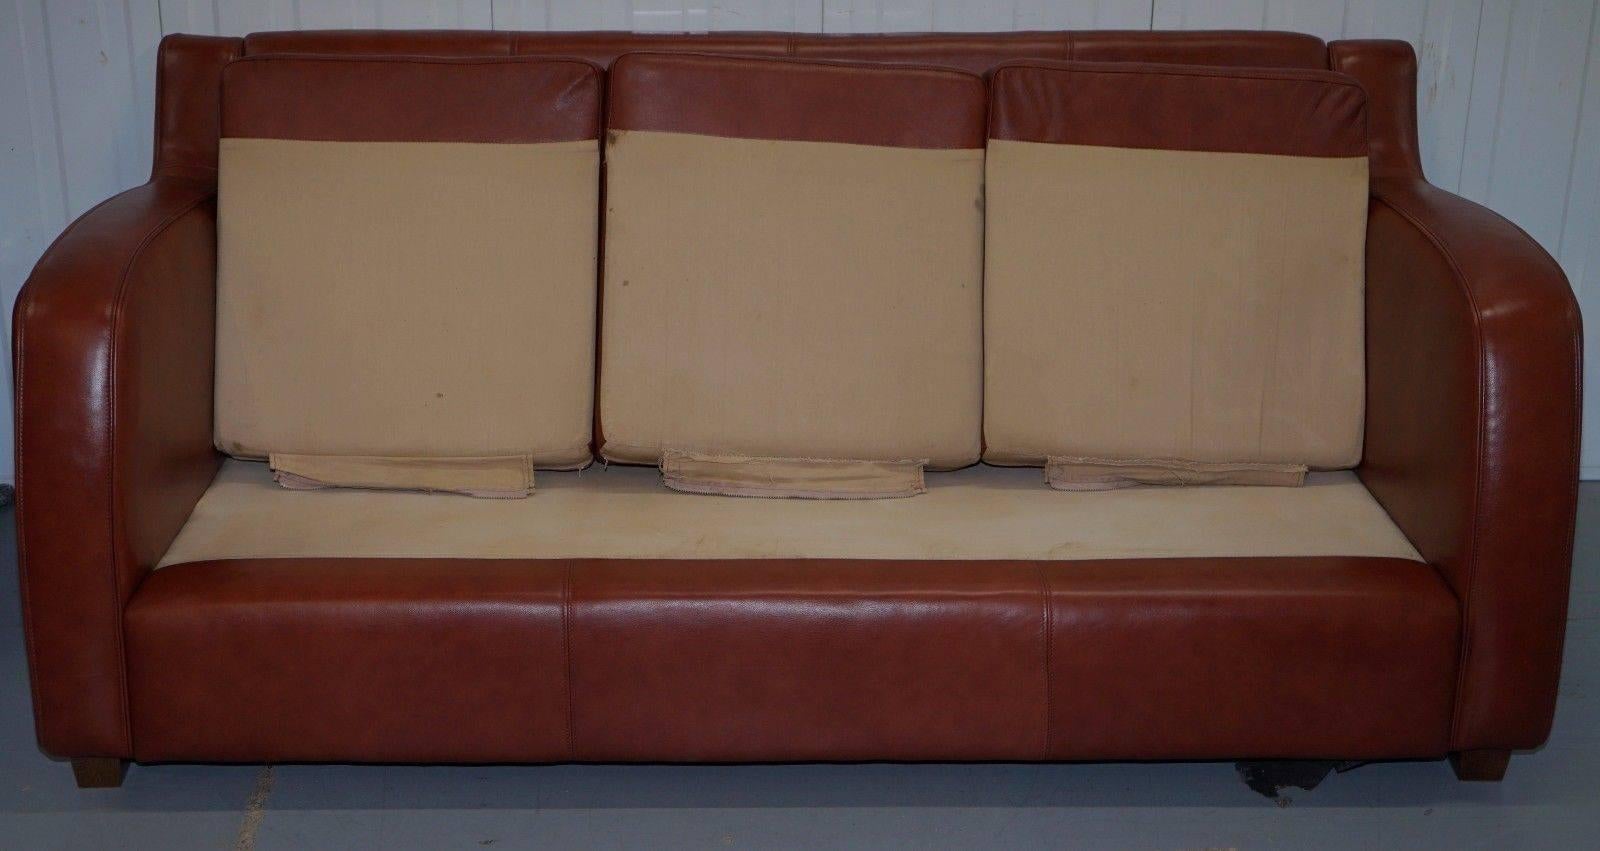 Contemporary Lovely Aged Chestnut Brown Leather Three-Seat Sofa Great Color and Comfortable